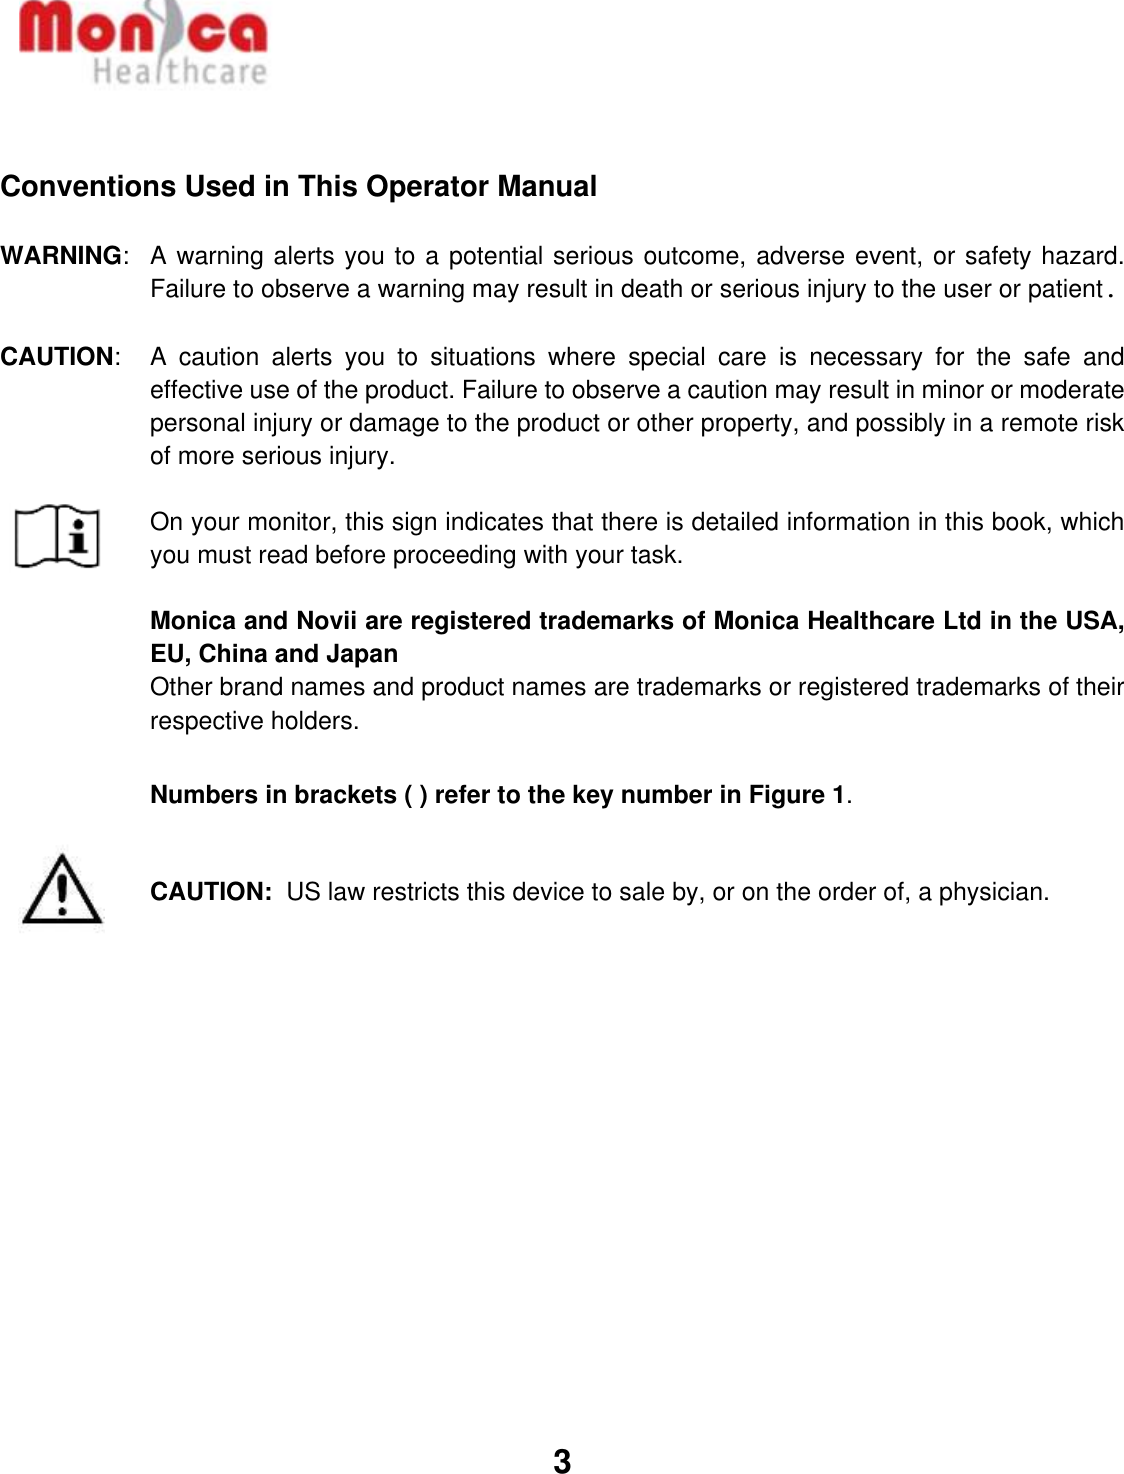   3    Conventions Used in This Operator Manual  WARNING:  A warning alerts you to a potential serious outcome, adverse event, or safety hazard. Failure to observe a warning may result in death or serious injury to the user or patient.  CAUTION:  A  caution  alerts  you  to  situations  where  special  care  is  necessary  for  the  safe  and effective use of the product. Failure to observe a caution may result in minor or moderate personal injury or damage to the product or other property, and possibly in a remote risk of more serious injury.  On your monitor, this sign indicates that there is detailed information in this book, which you must read before proceeding with your task.  Monica and Novii are registered trademarks of Monica Healthcare Ltd in the USA, EU, China and Japan Other brand names and product names are trademarks or registered trademarks of their respective holders.  Numbers in brackets ( ) refer to the key number in Figure 1.   CAUTION:  US law restricts this device to sale by, or on the order of, a physician.     